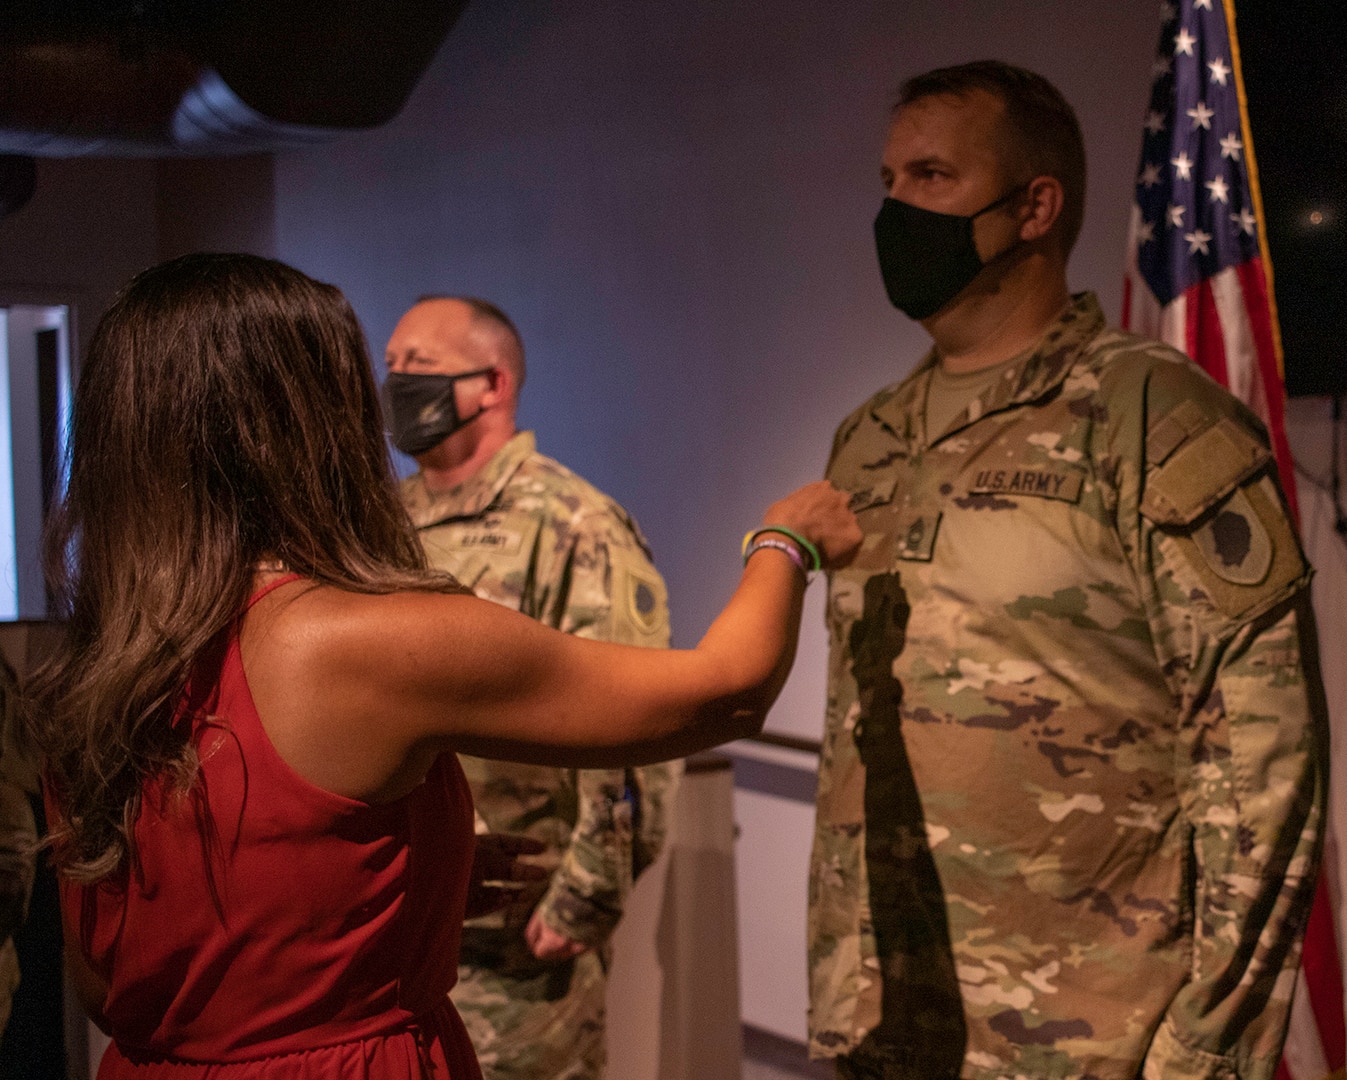 Tsoetsy Harris, wife of newly promoted Illinois Army National Guard Master Sgt. Matthew Harris, of Petersburg, Illinois, secures his new rank on his uniform during the promotion ceremony Sept. 16 at the Illinois State Military Museum, Springfield, Illinois.